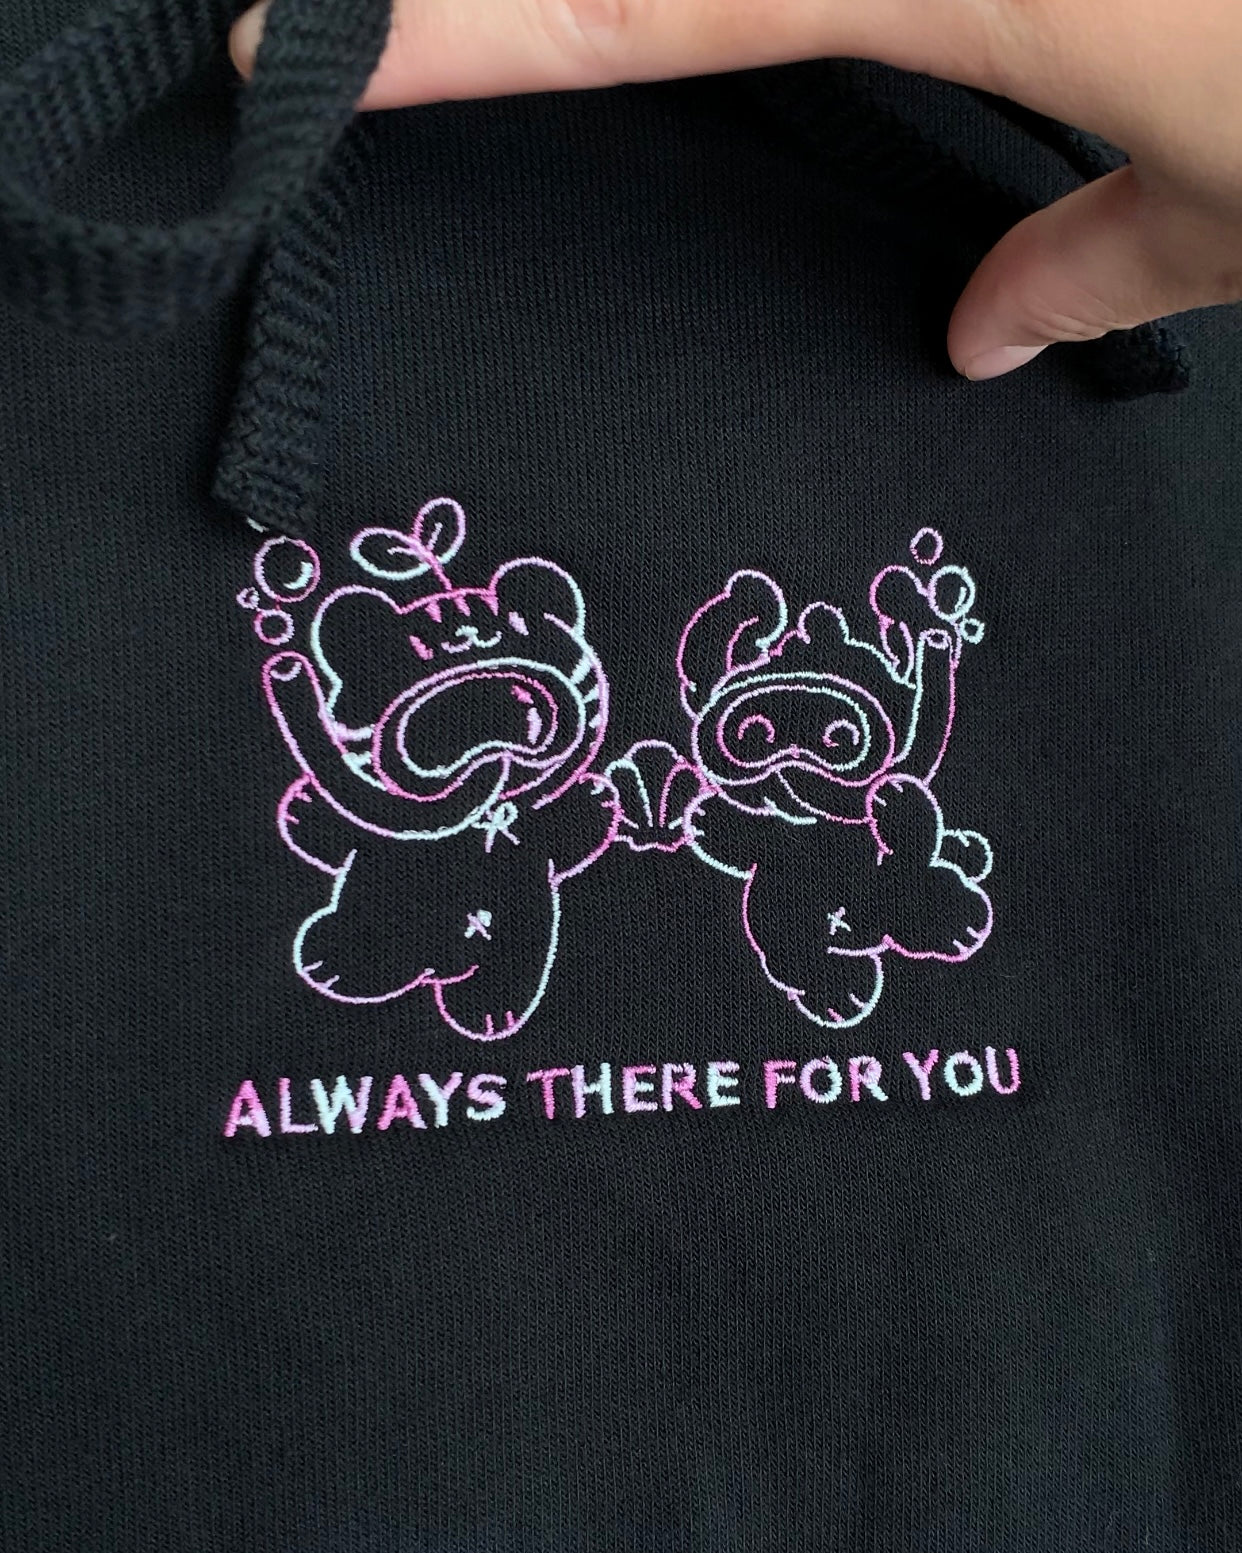 ALWAYS THERE FOR YOU Embroidered Butter Soft Hoodie Sweatshirt - Cropped